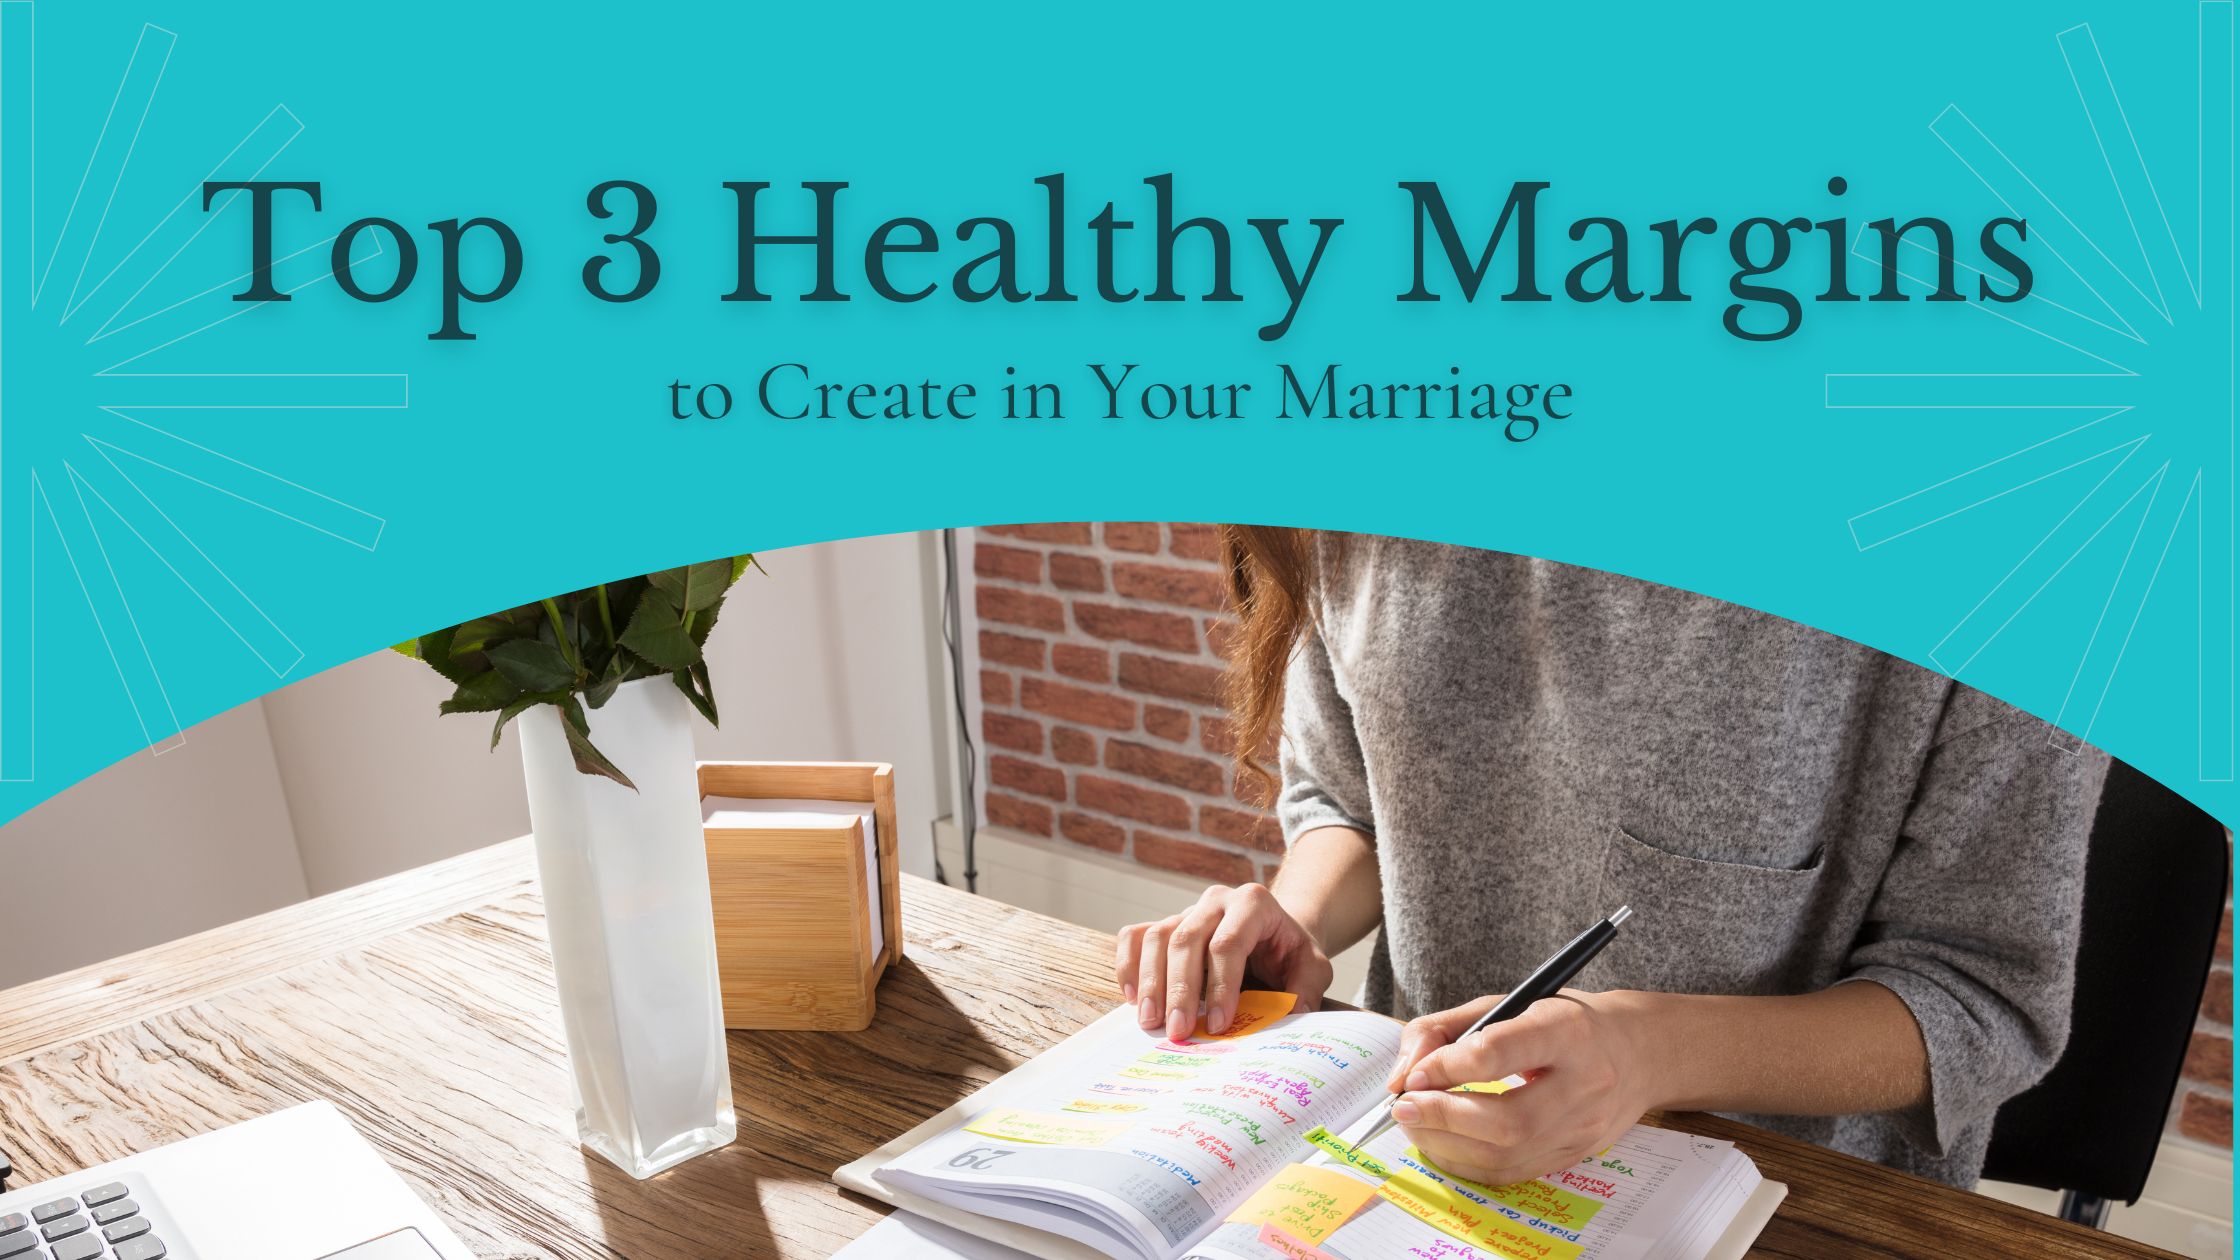 Top 3 Healthy Margins to Create in Your Marriage